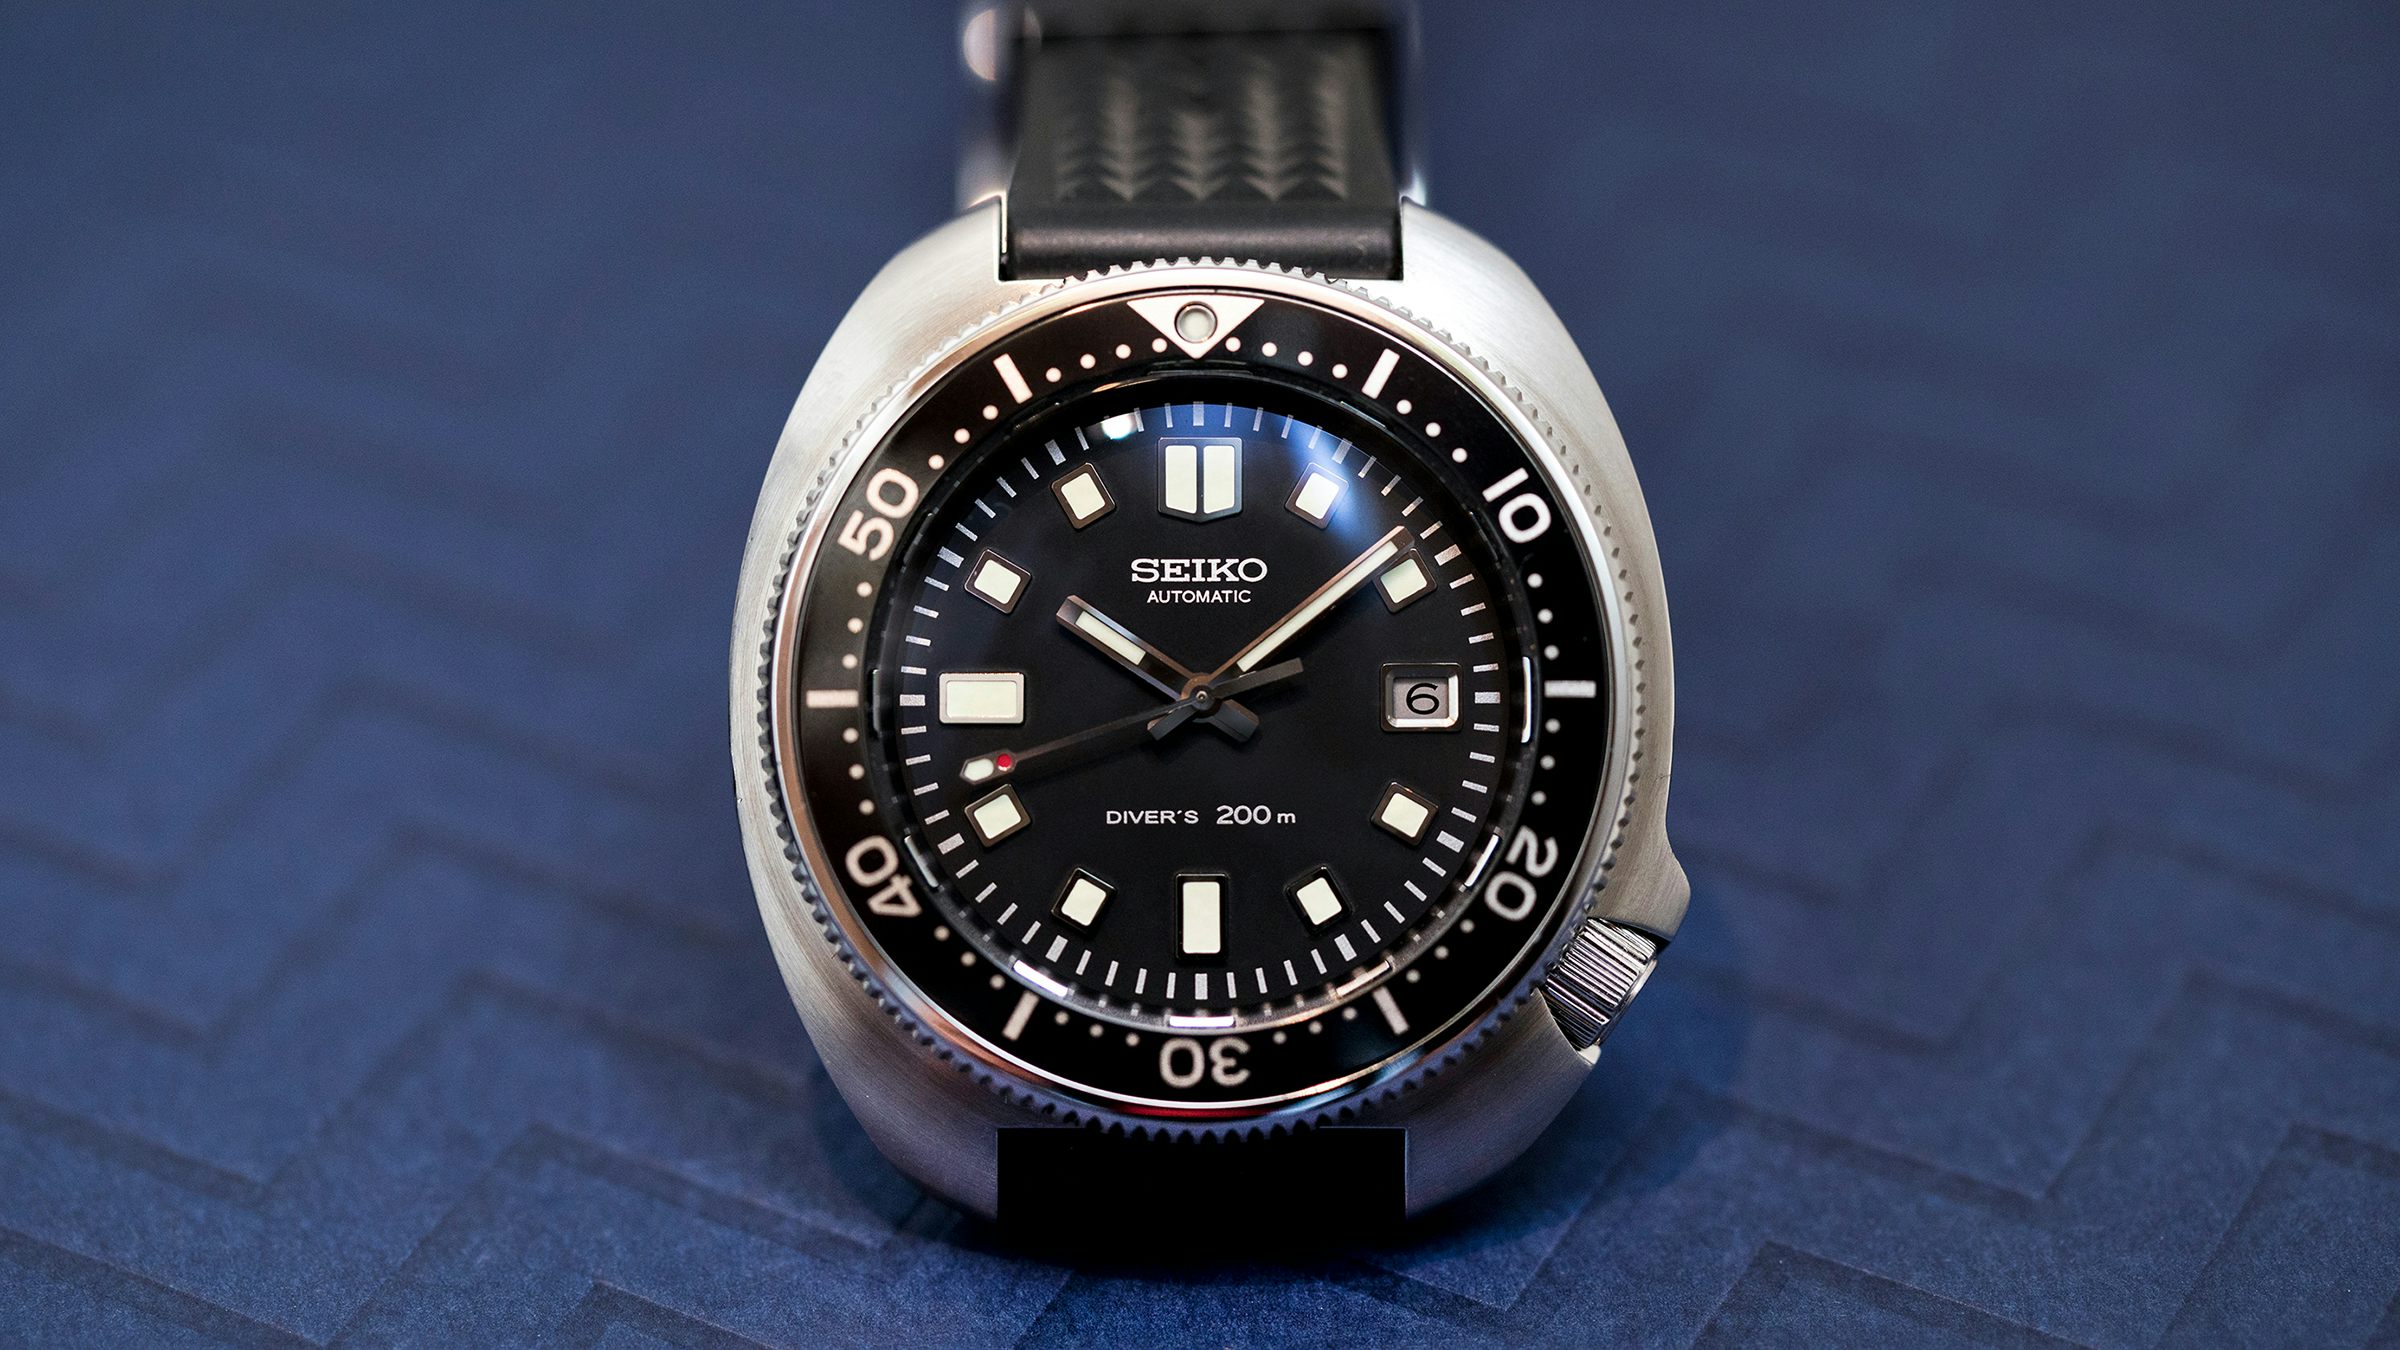 Hands-On: The Seiko Prospex 1970 Diver's Re-Creation Limited Edition SLA033  - Hodinkee